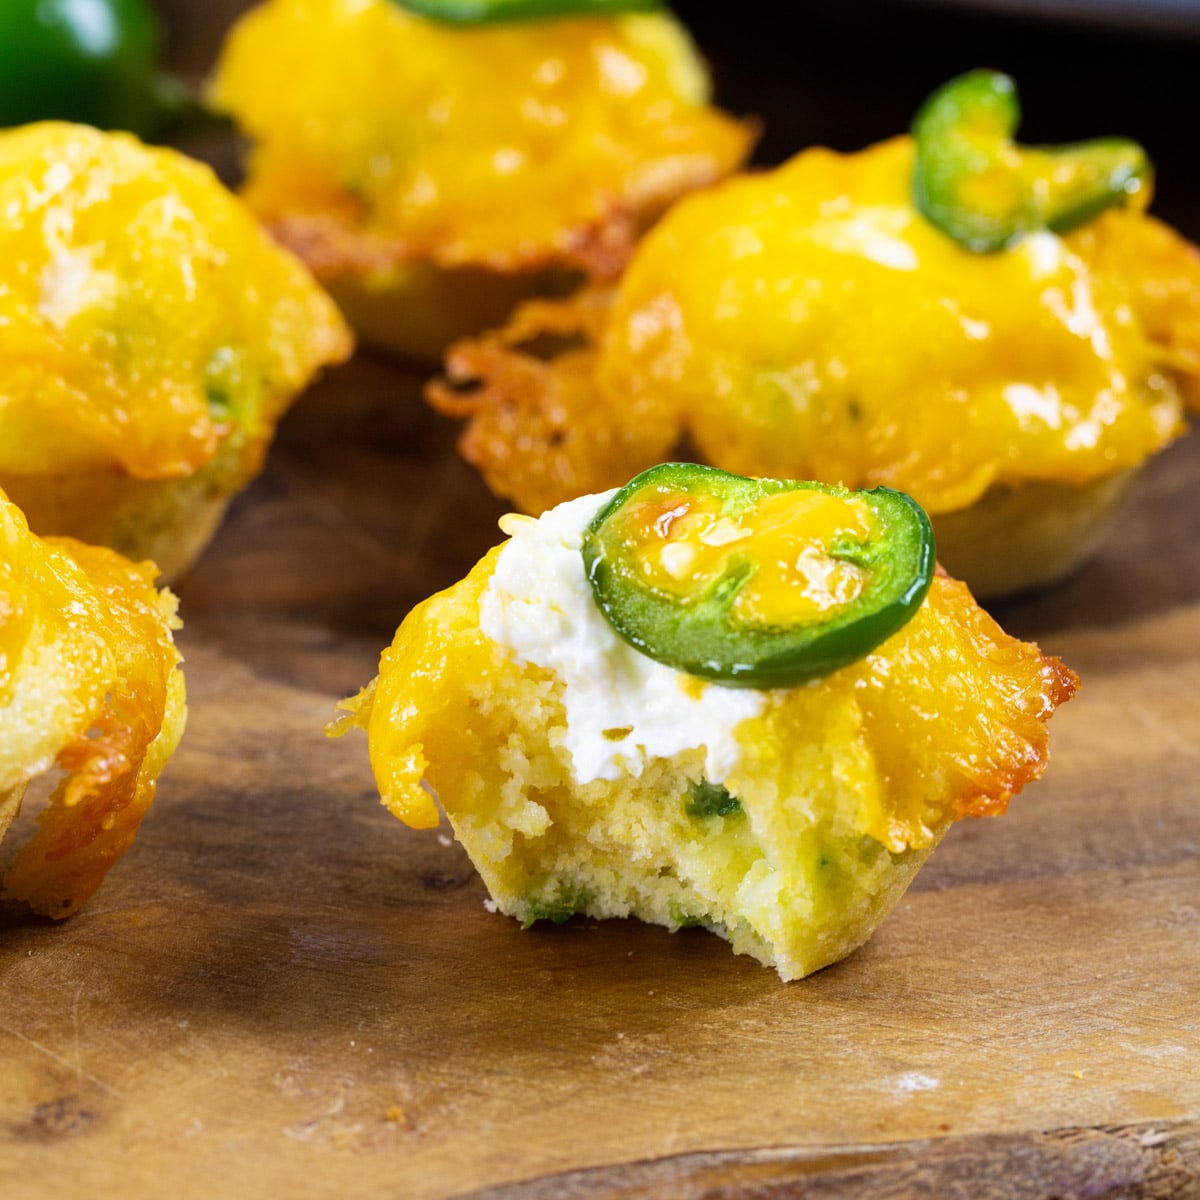 Jalapeno Popper Corn Muffins with bite taken out of one to show inside.